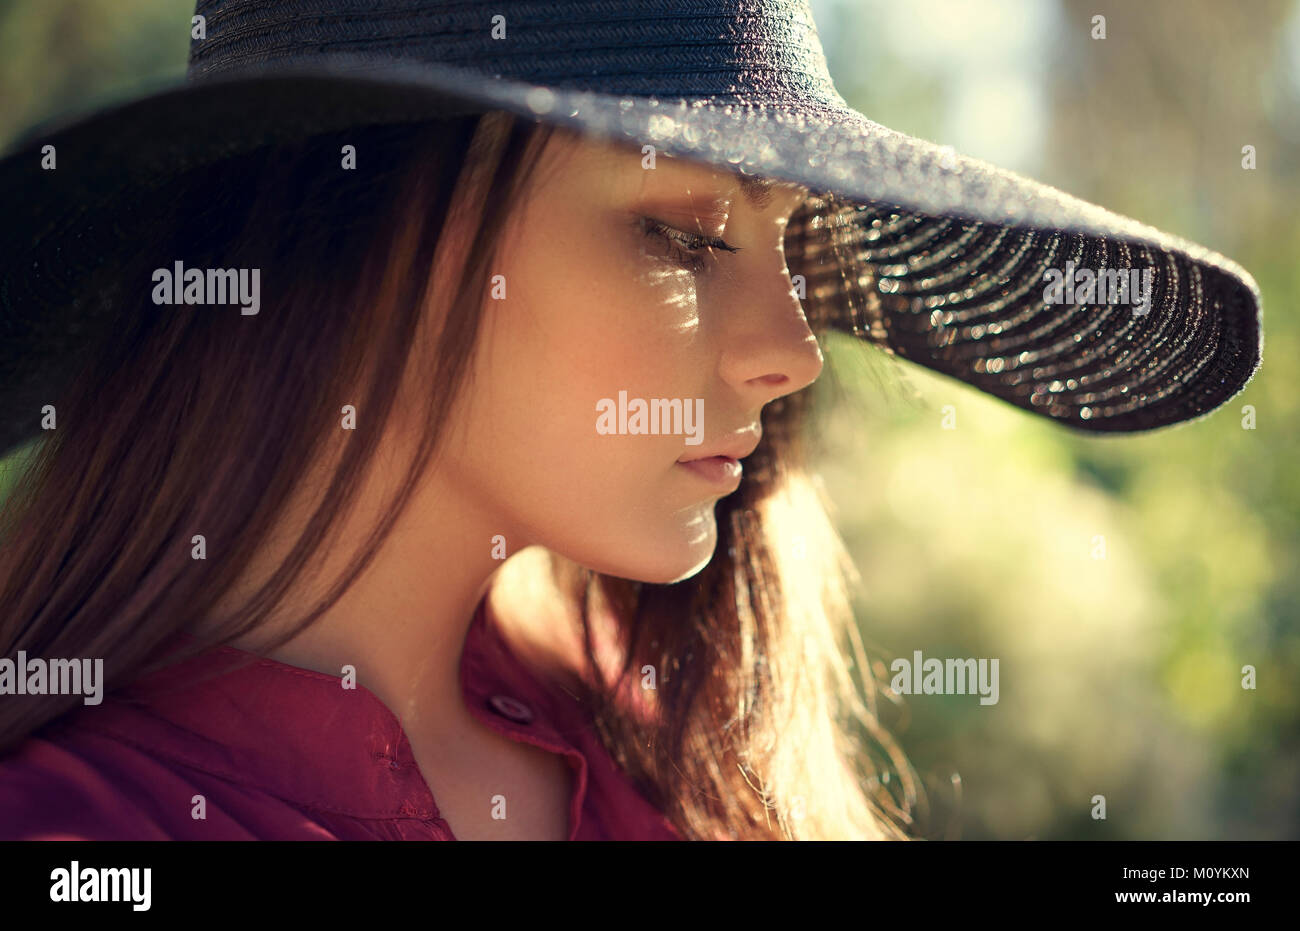 Close up of Caucasian teenage girl wearing hat Banque D'Images